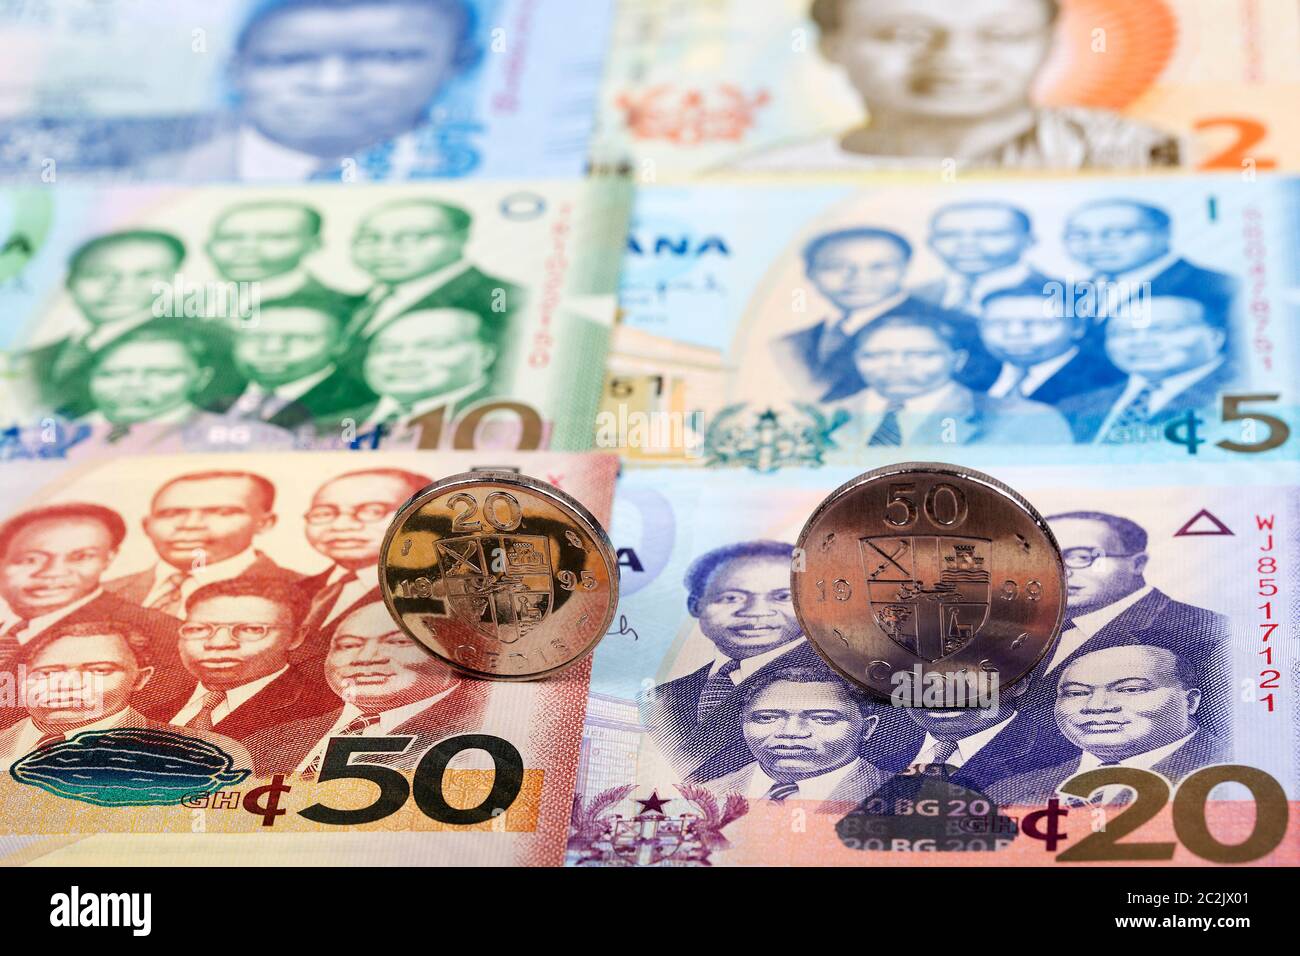 Ghanaian coins on the background of banknotes Stock Photo